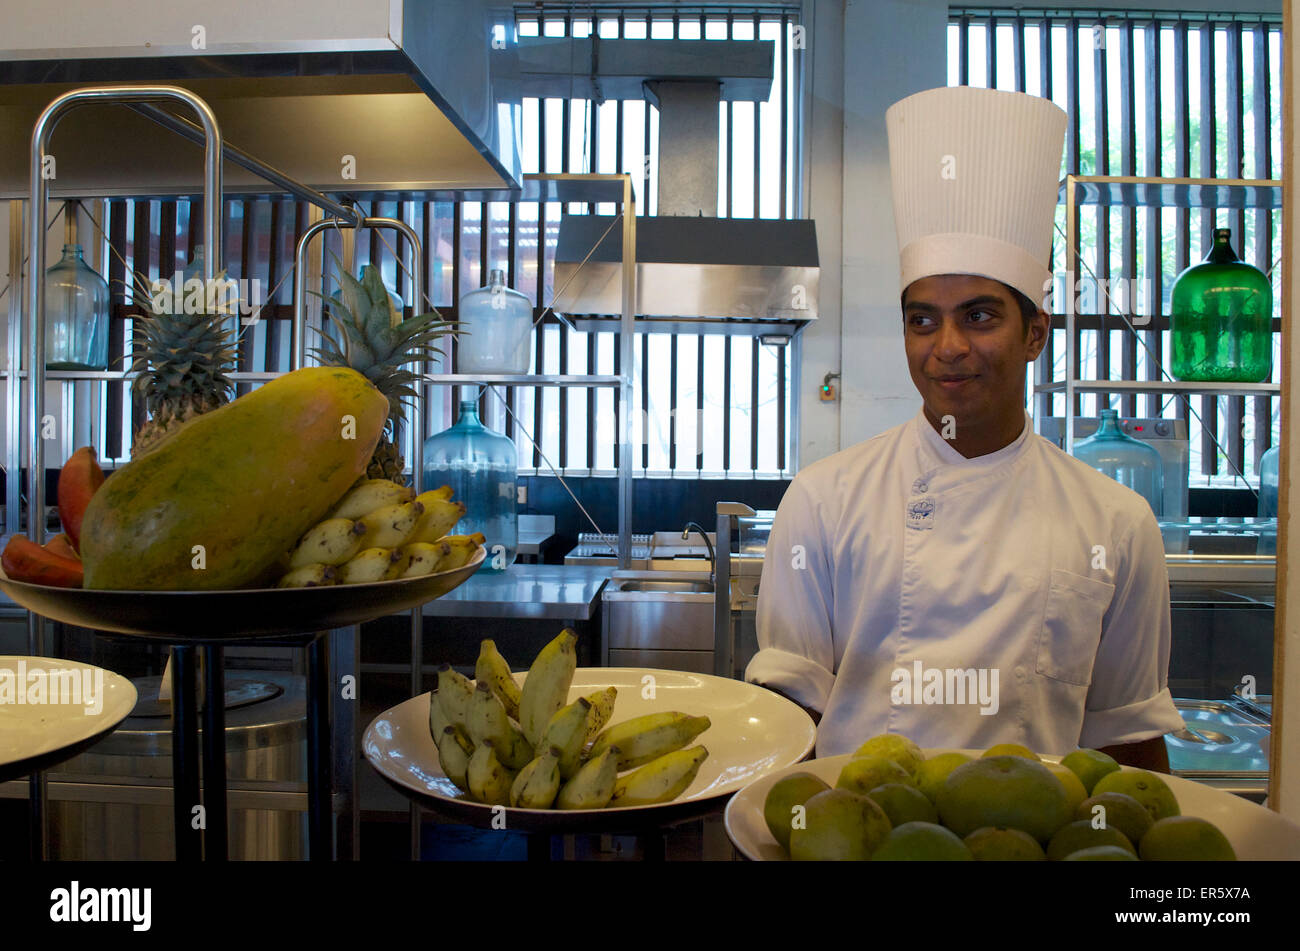 Fruit on the counter and cook in the kitchen of Hotel Jetwing Blue, Negombo, West coast, Sri Lanka Stock Photo